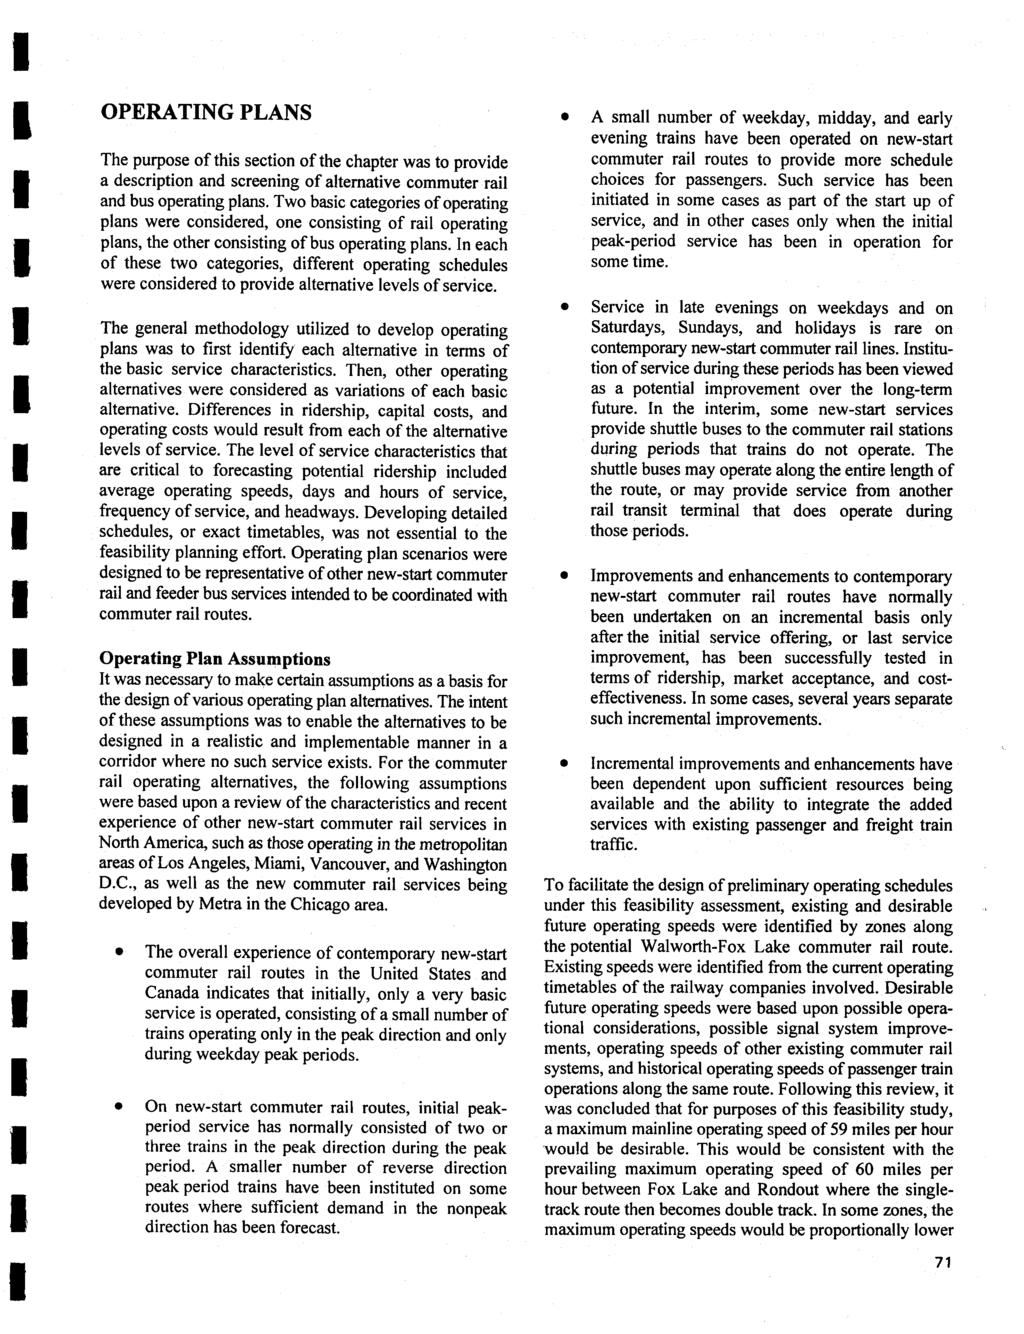 OPERATING PLANS The purpose of this section of the chapter was to provide a description and screening of alternative commuter rail and bus operating plans.